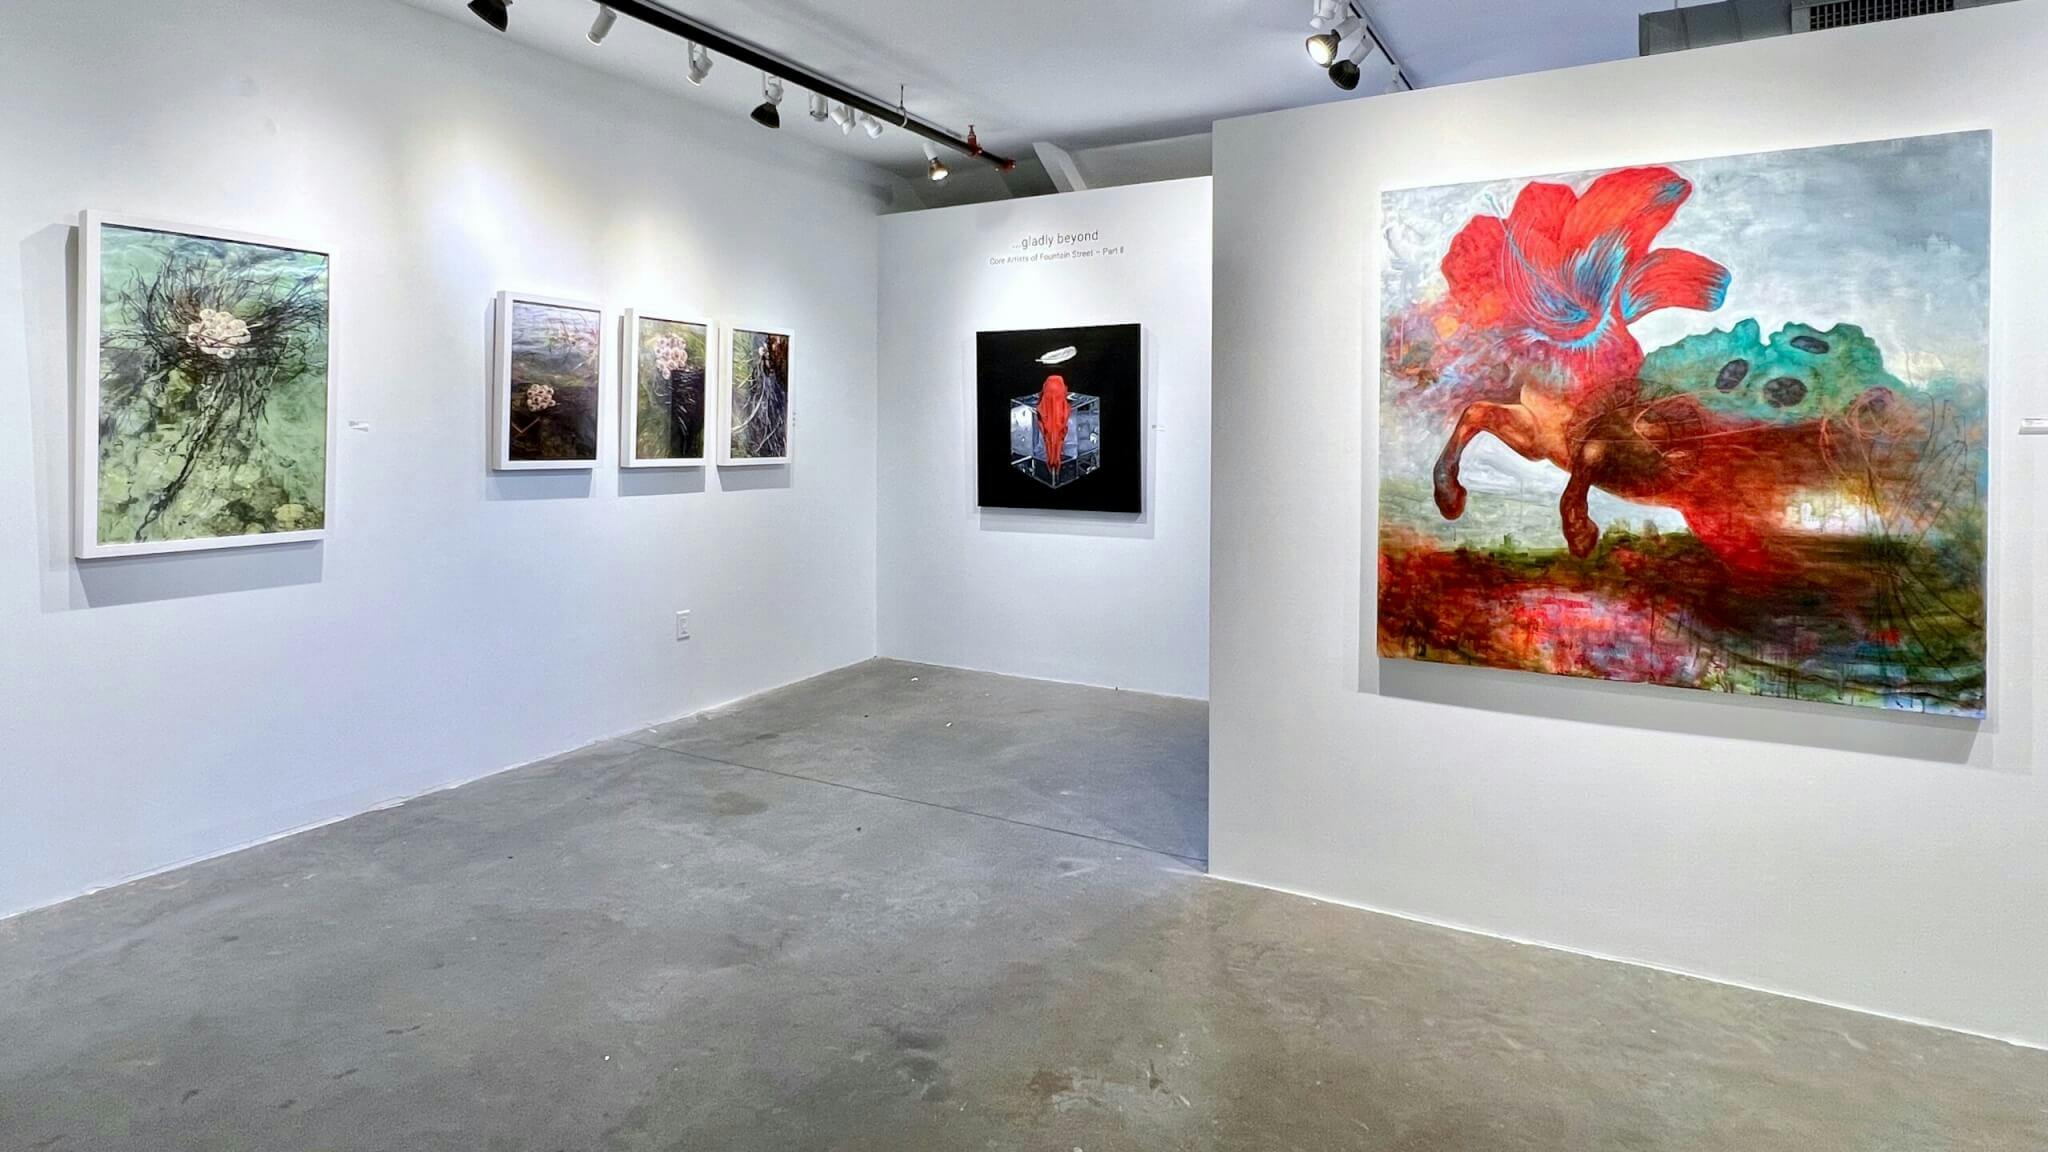 On a white wall positioned in the center hangs Dalvin Byron's singular work, flanked by four of Miller Opie's to the left, and one of Sandra Cohen's in the right foreground.